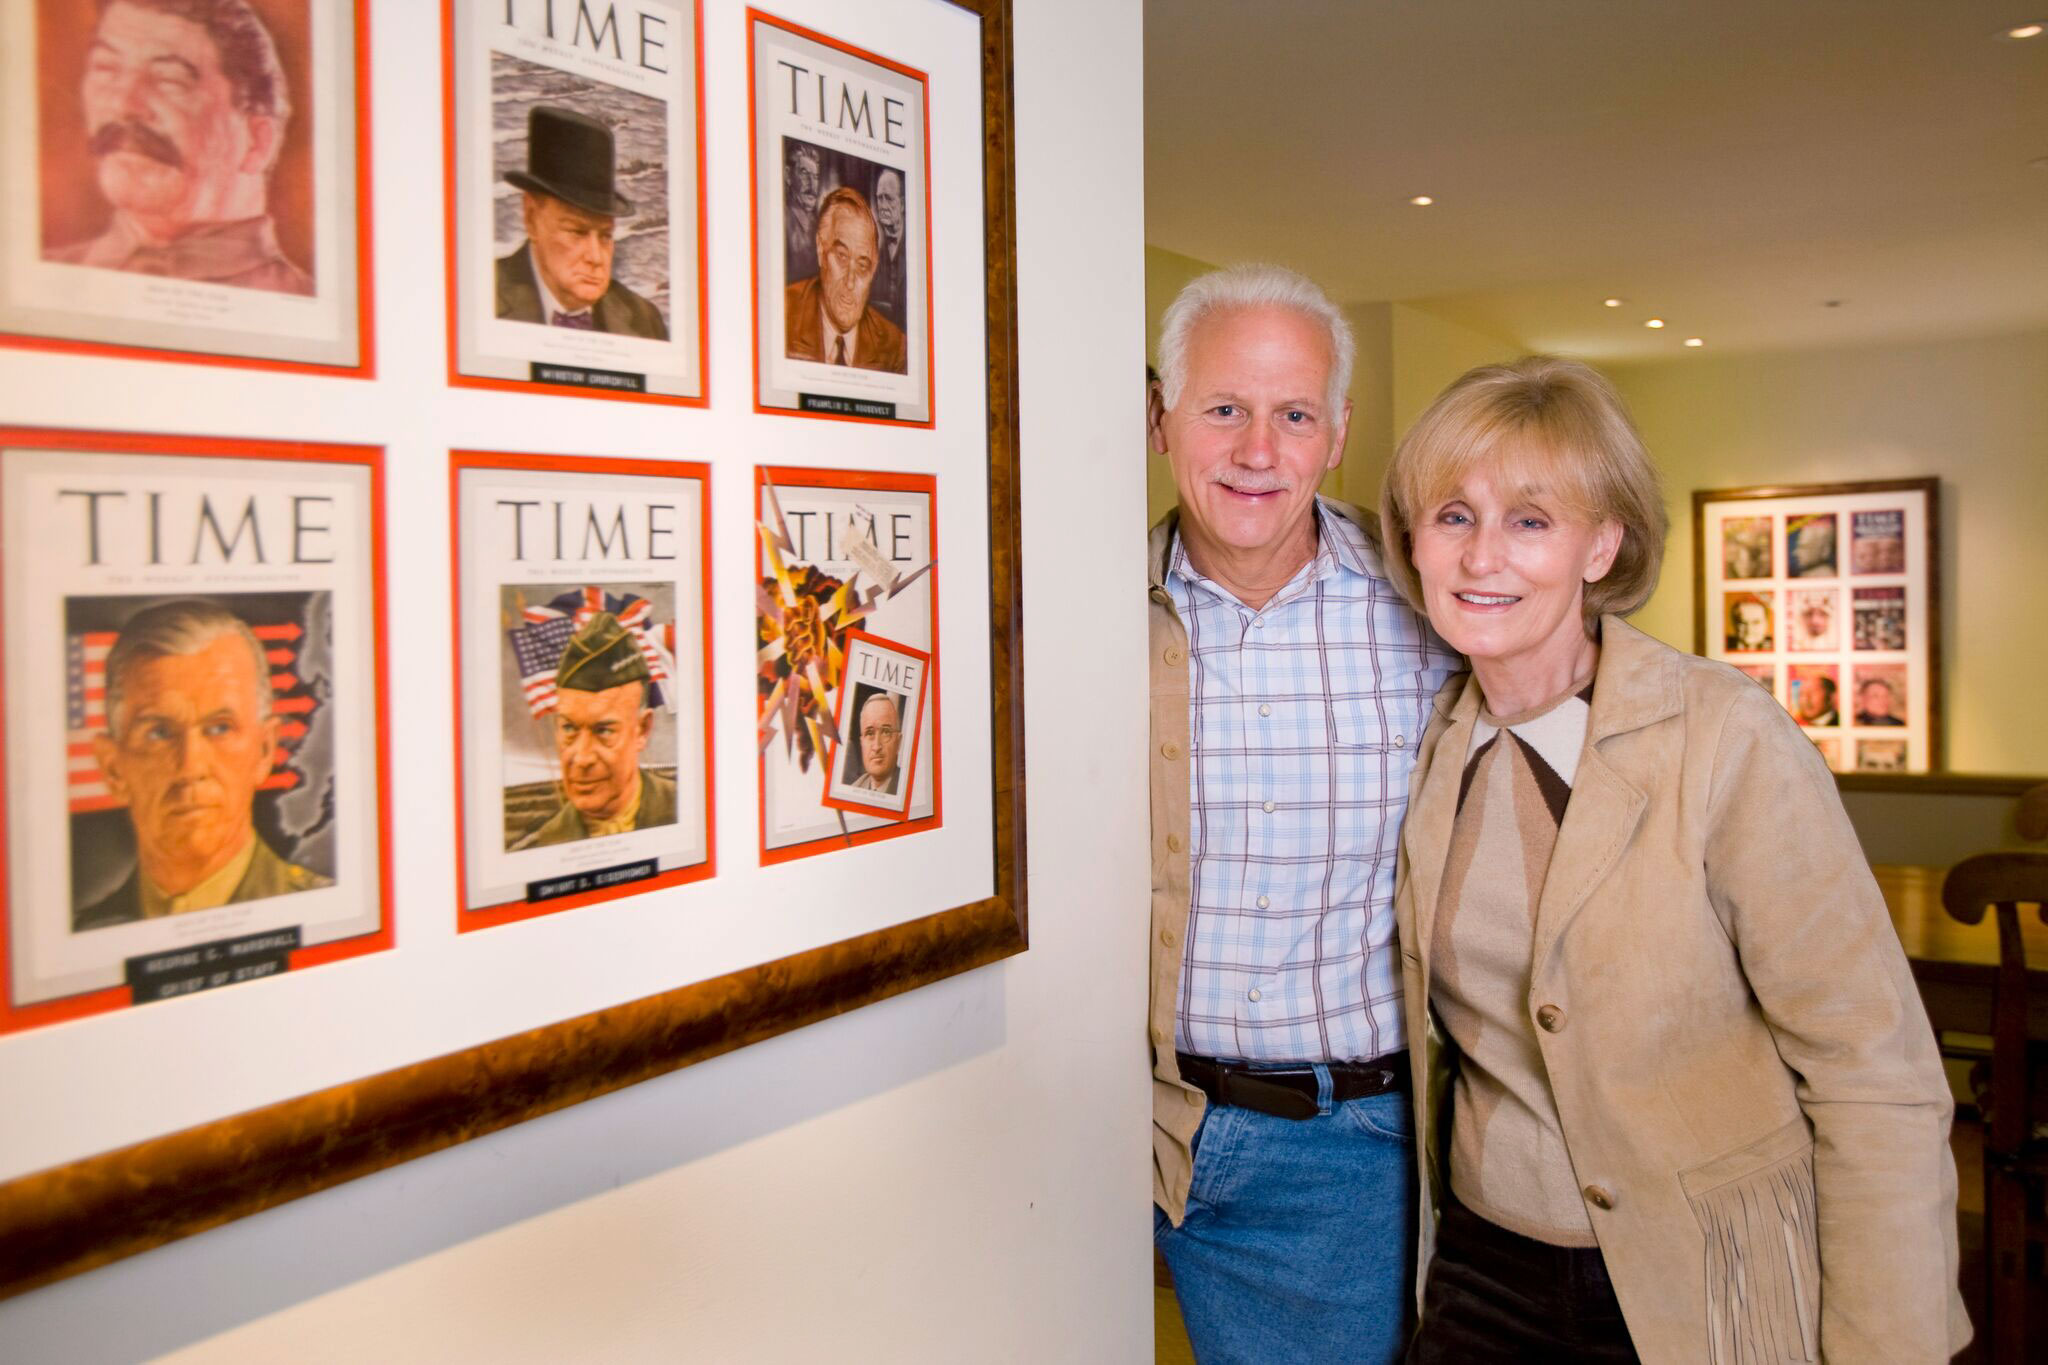 Ken Adelman and his wife, Carol, at their home in Aspen, Colo.